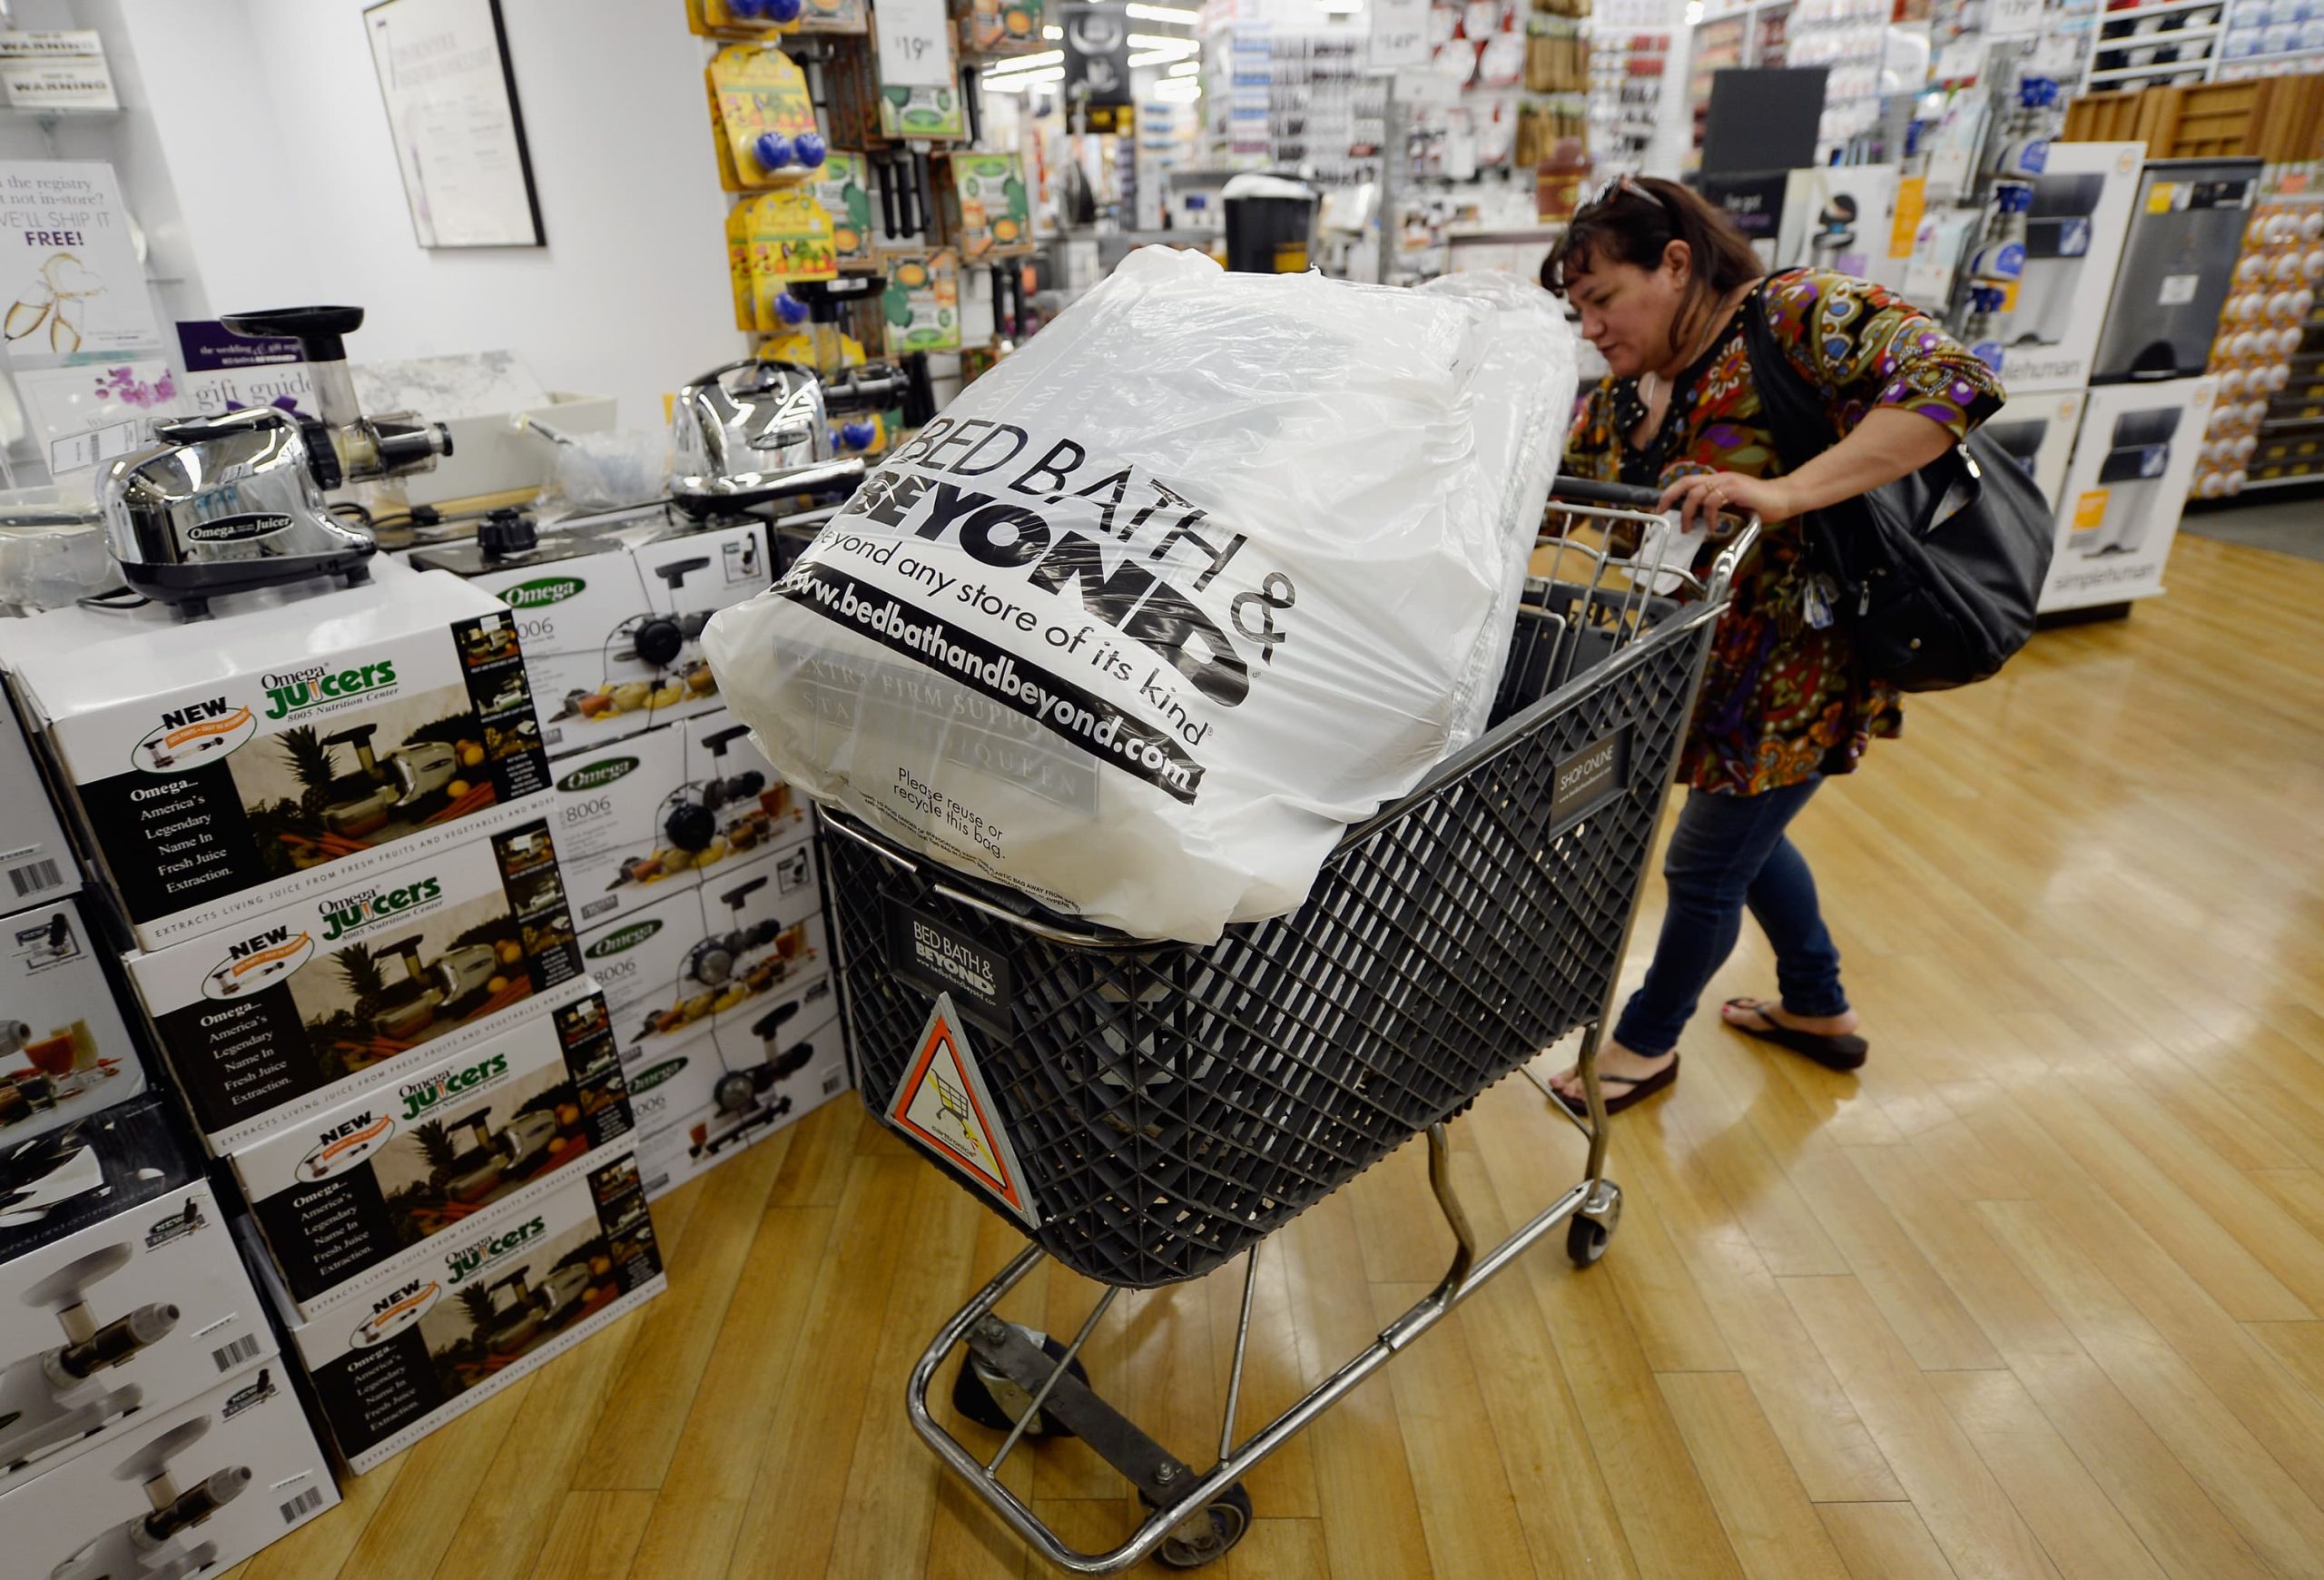 Bed Bath & Beyond shares surge after GameStop chairman reveals big stake